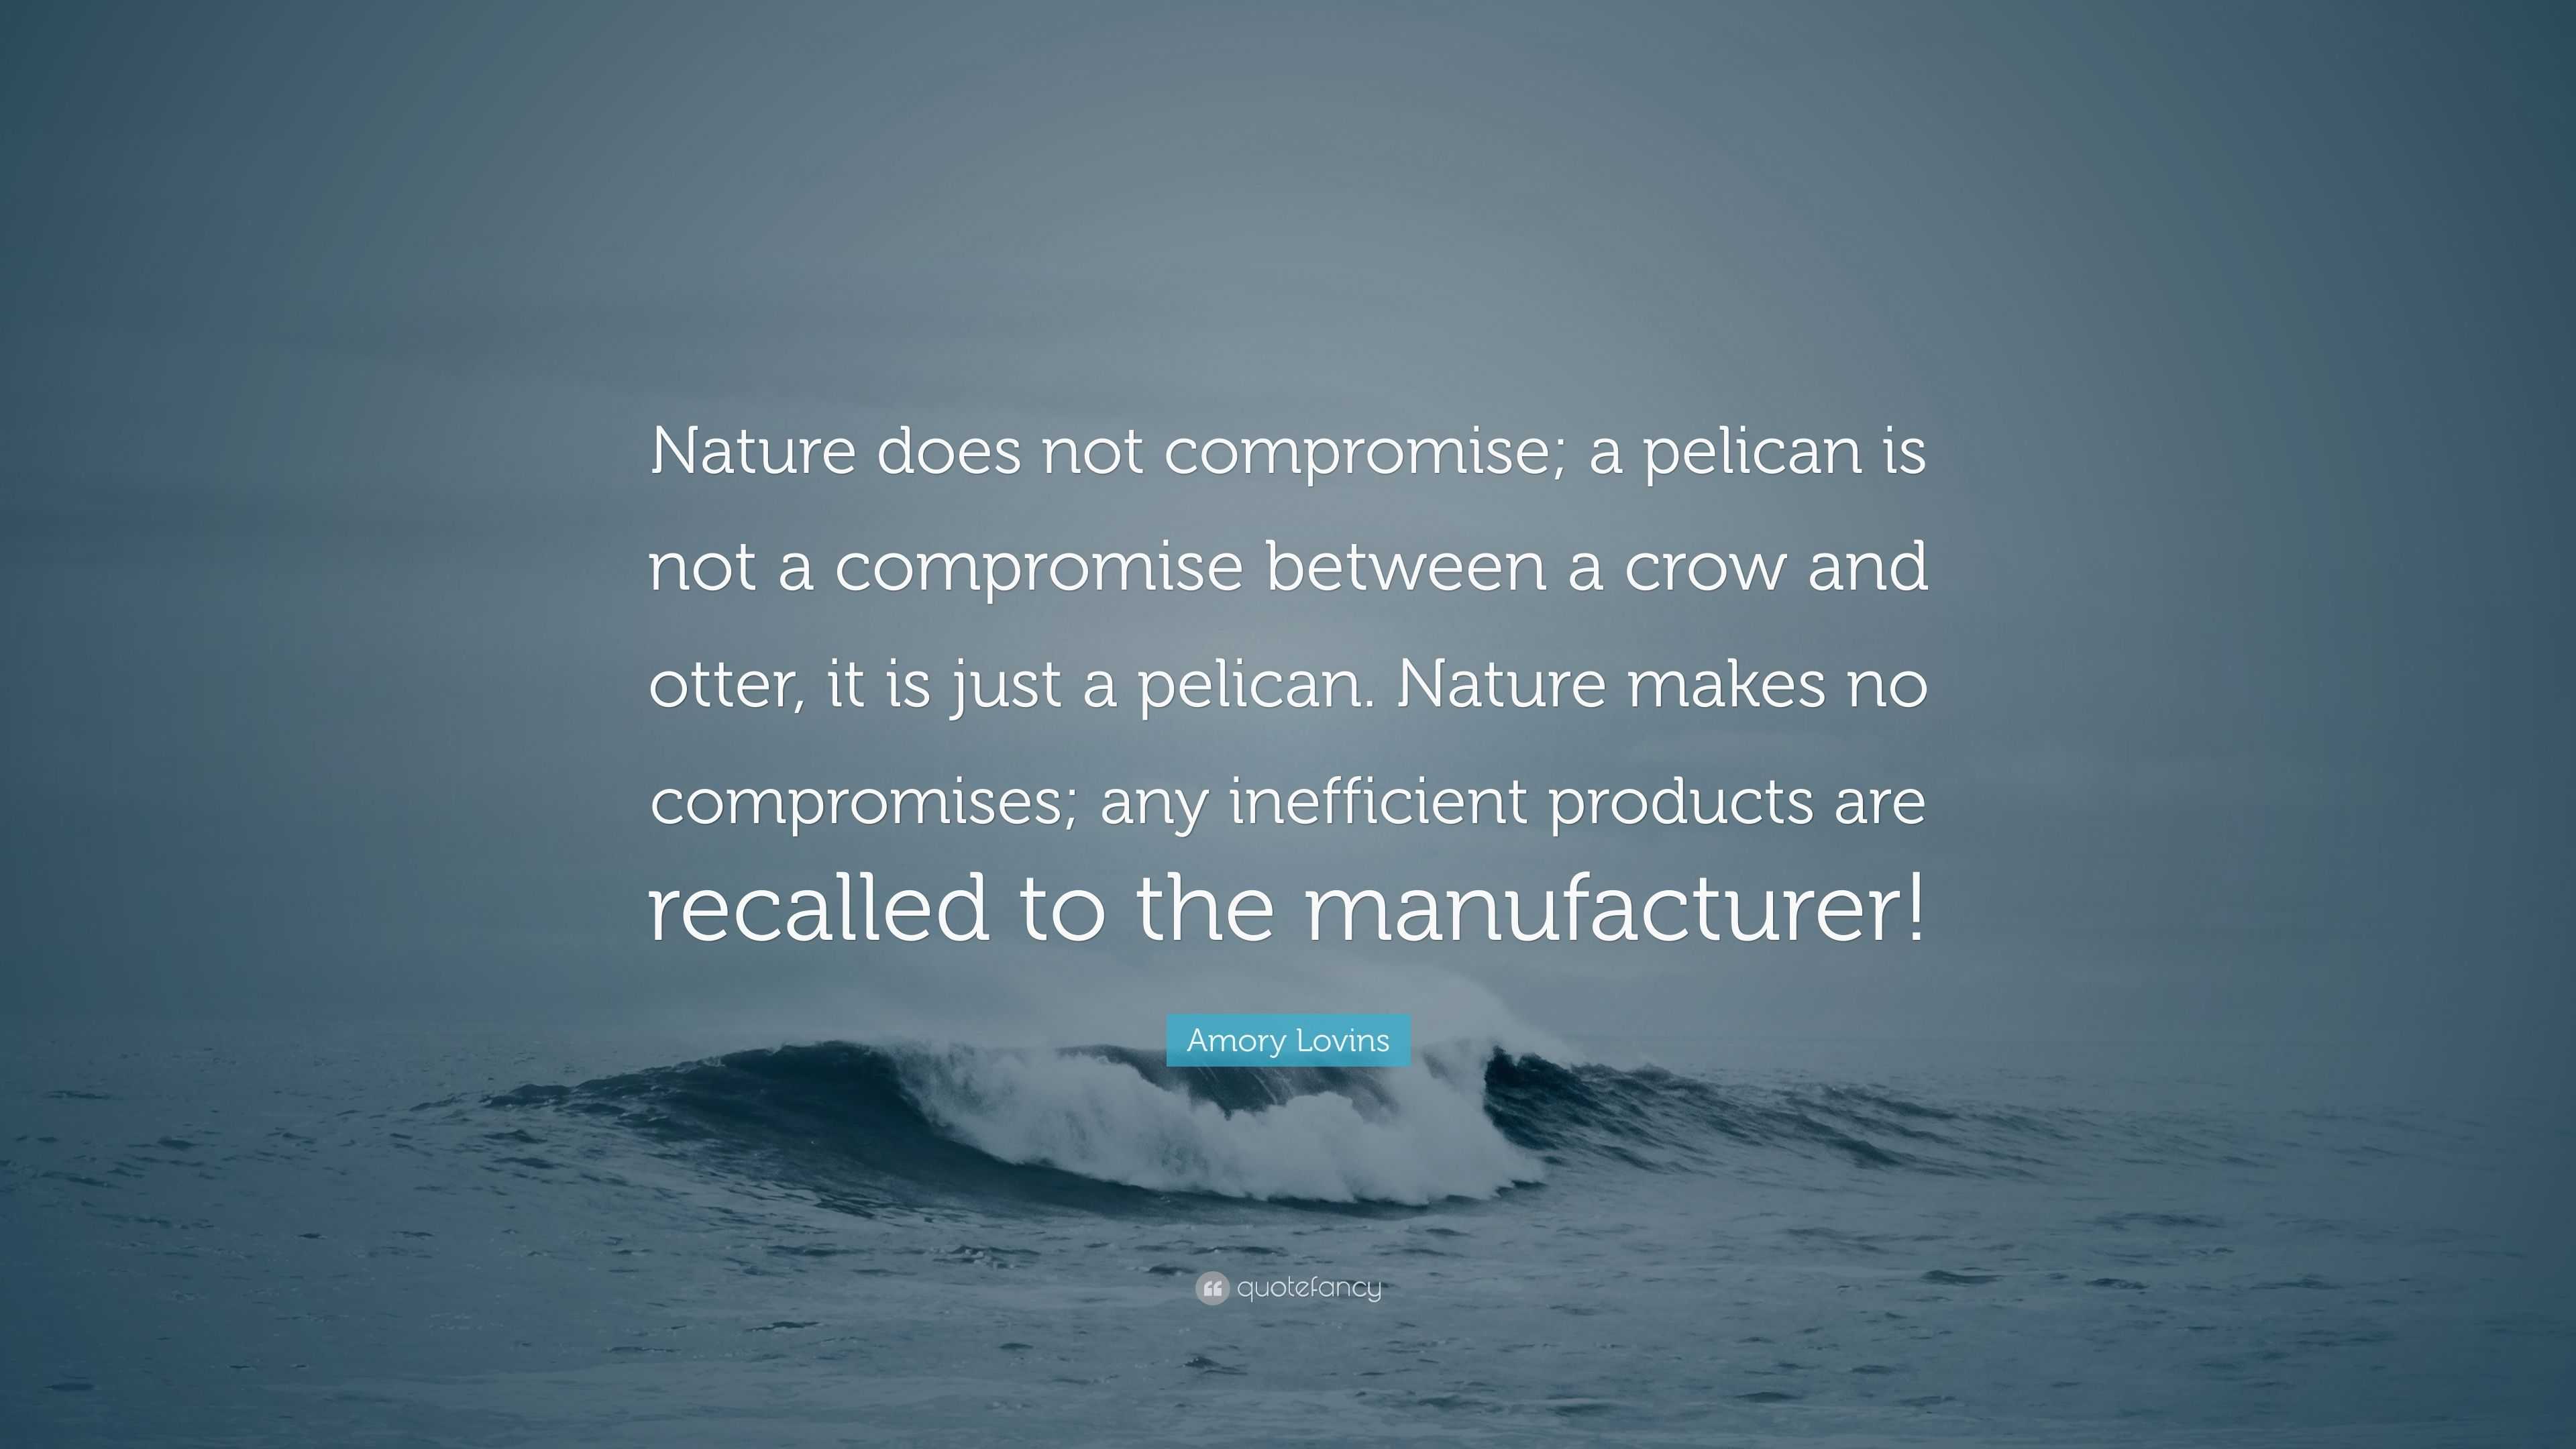 Amory Lovins Quote: “Nature does not compromise; a pelican is not